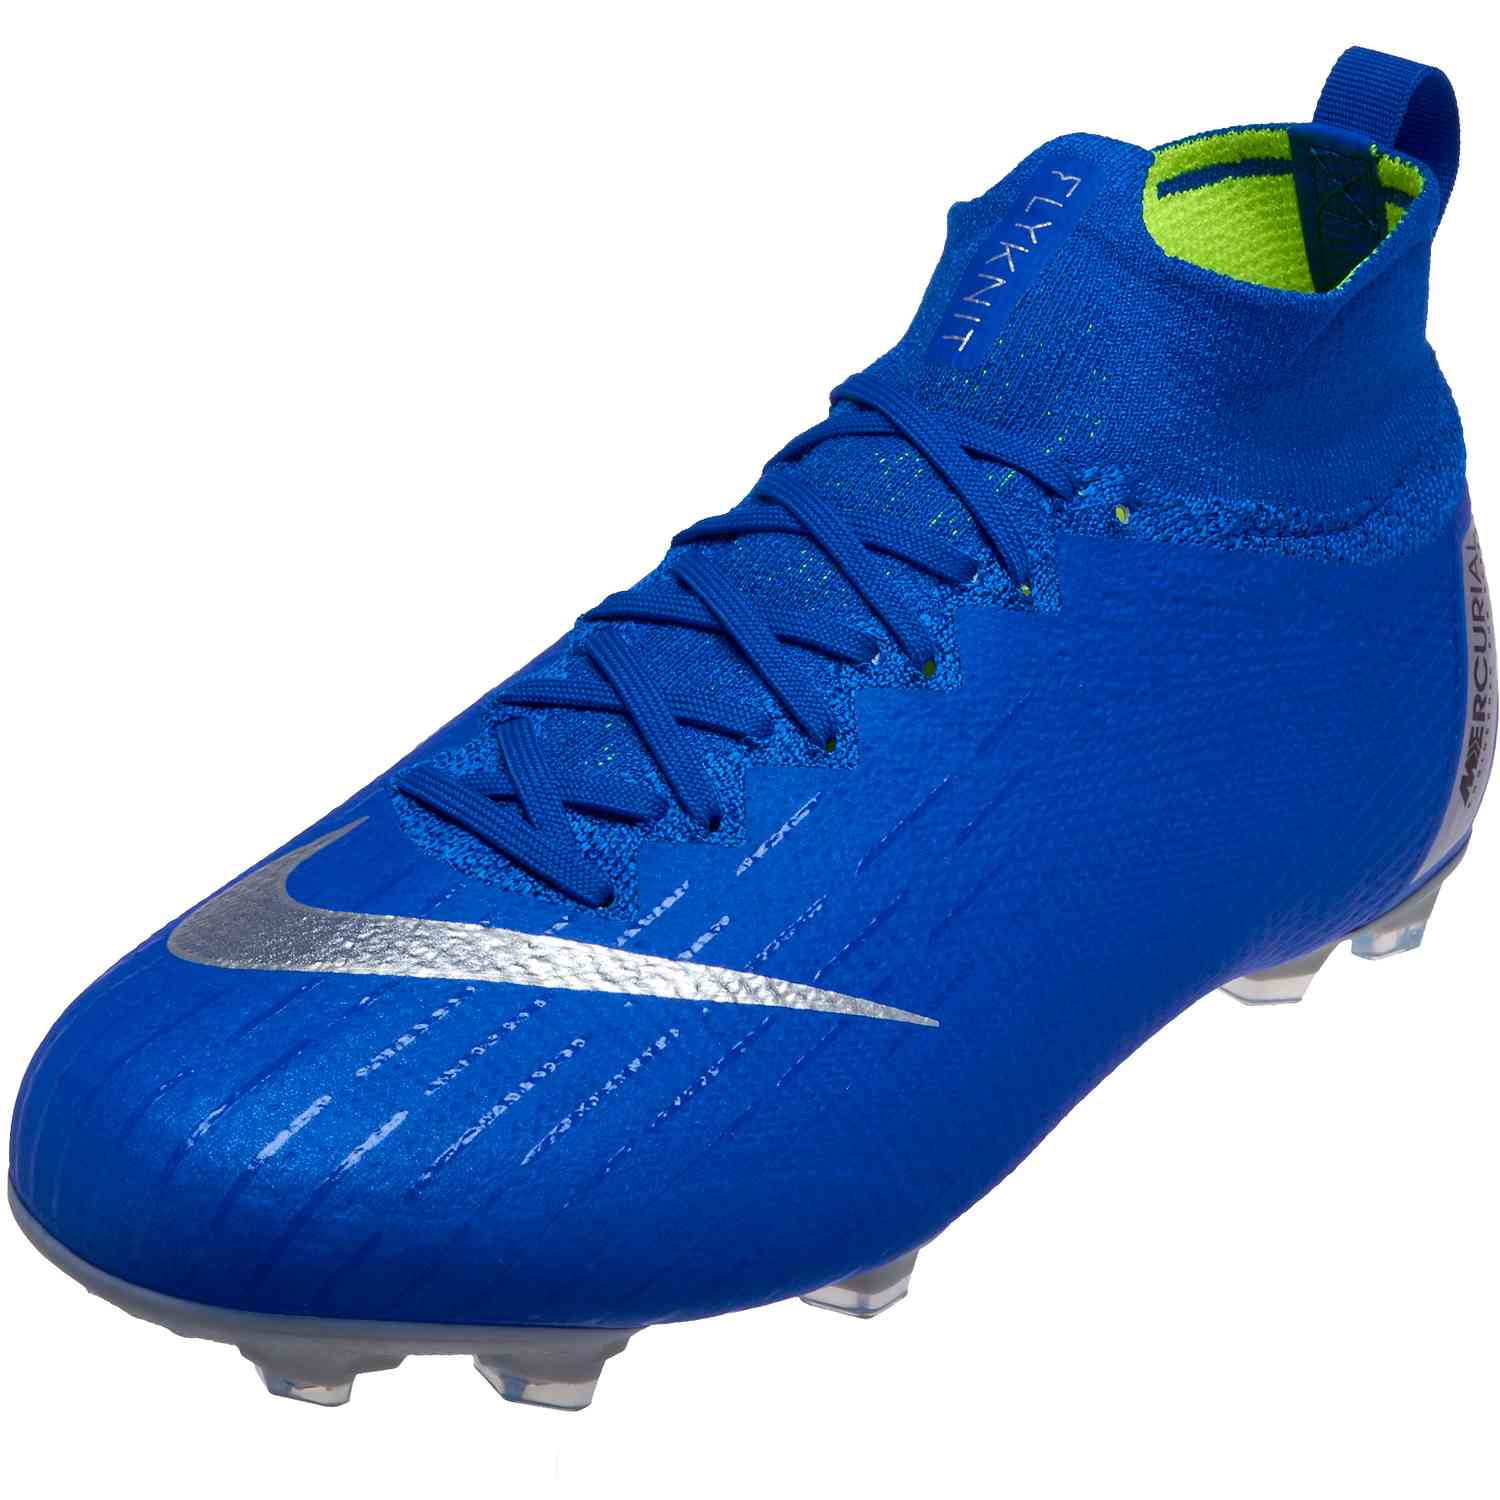 nike mercurial superfly black and blue